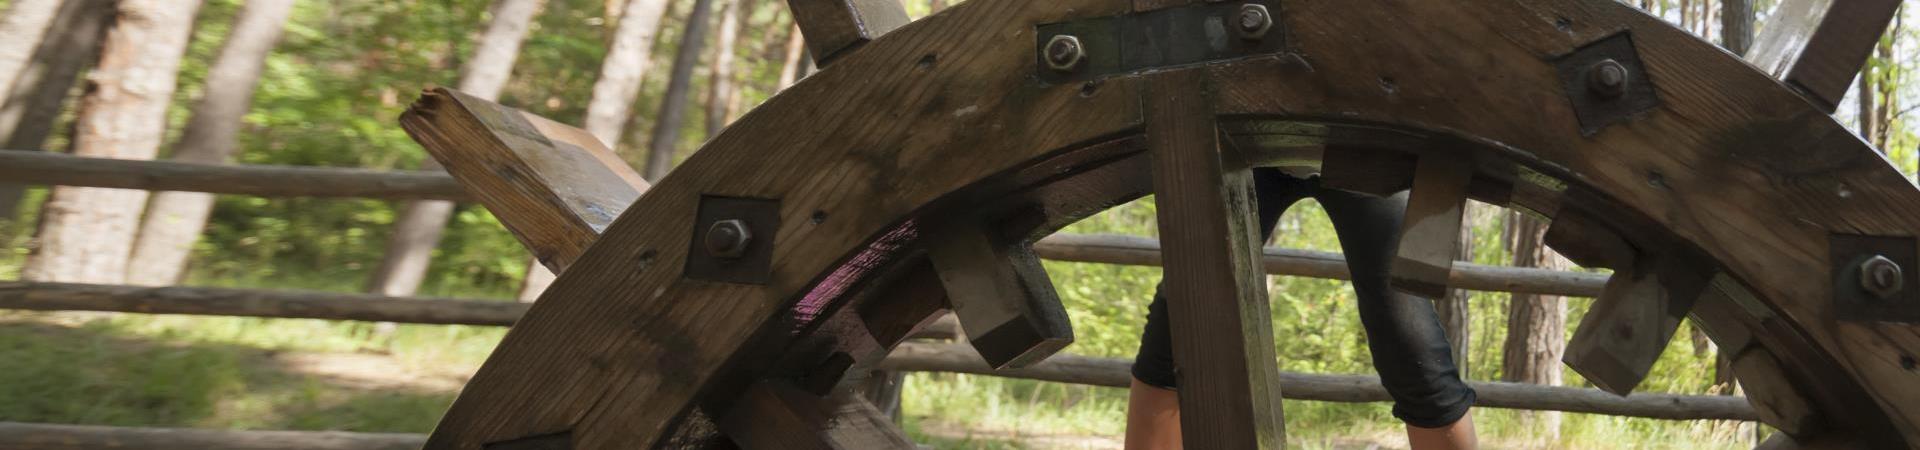 A kid next to a water wheel